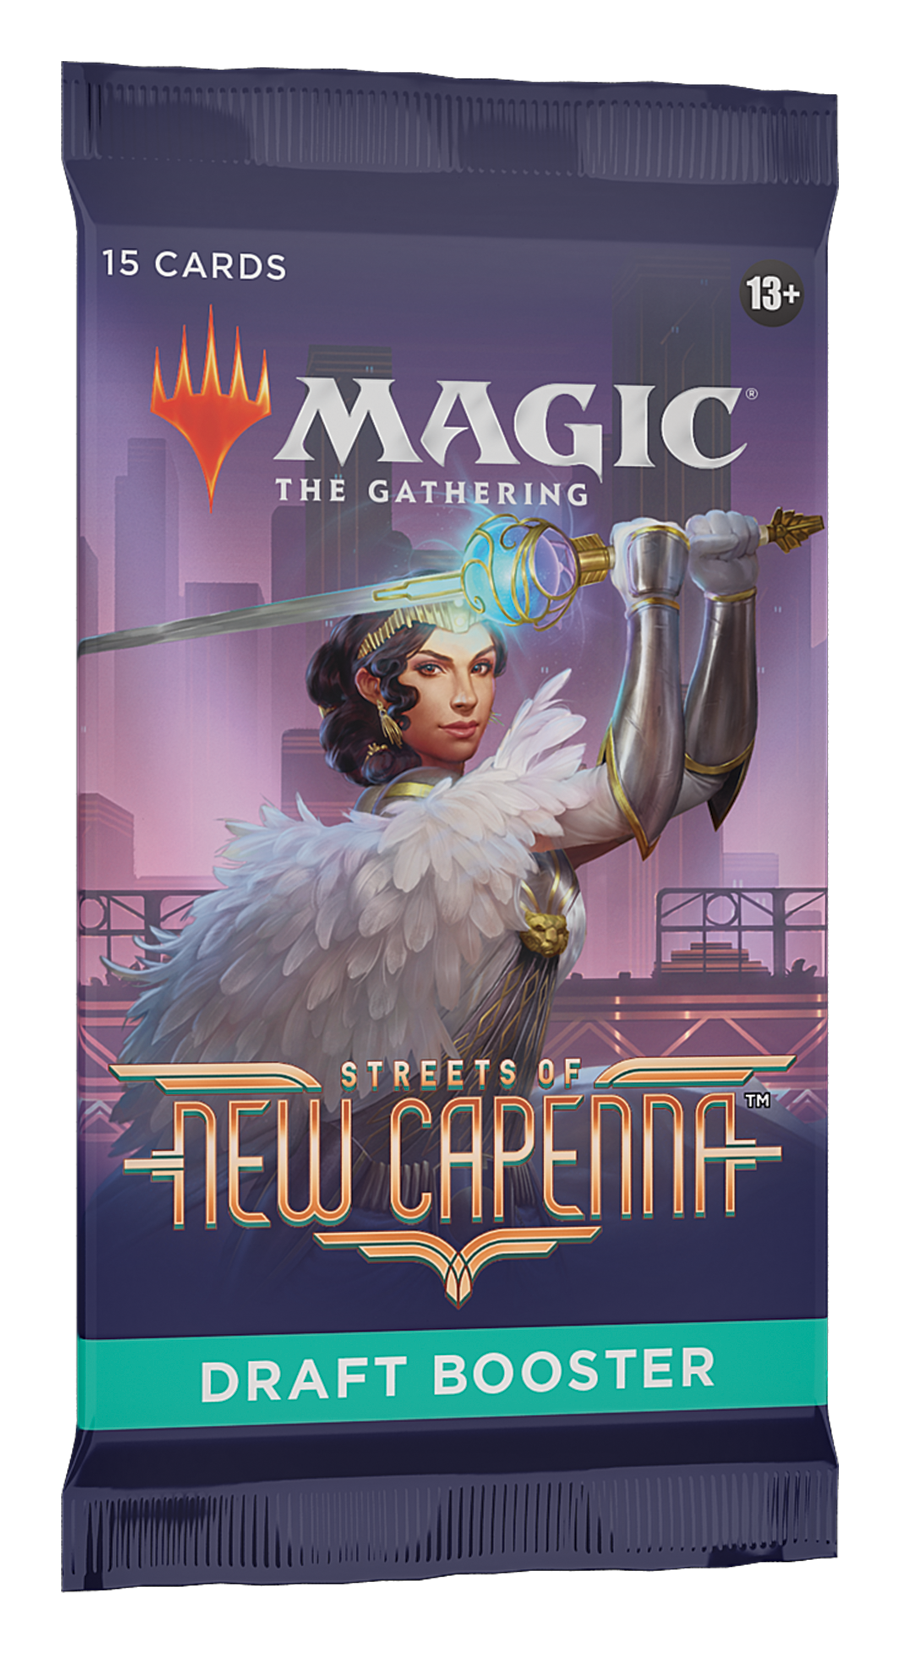 Magic: the Gathering - Streets of New Capenna Draft Booster Pack